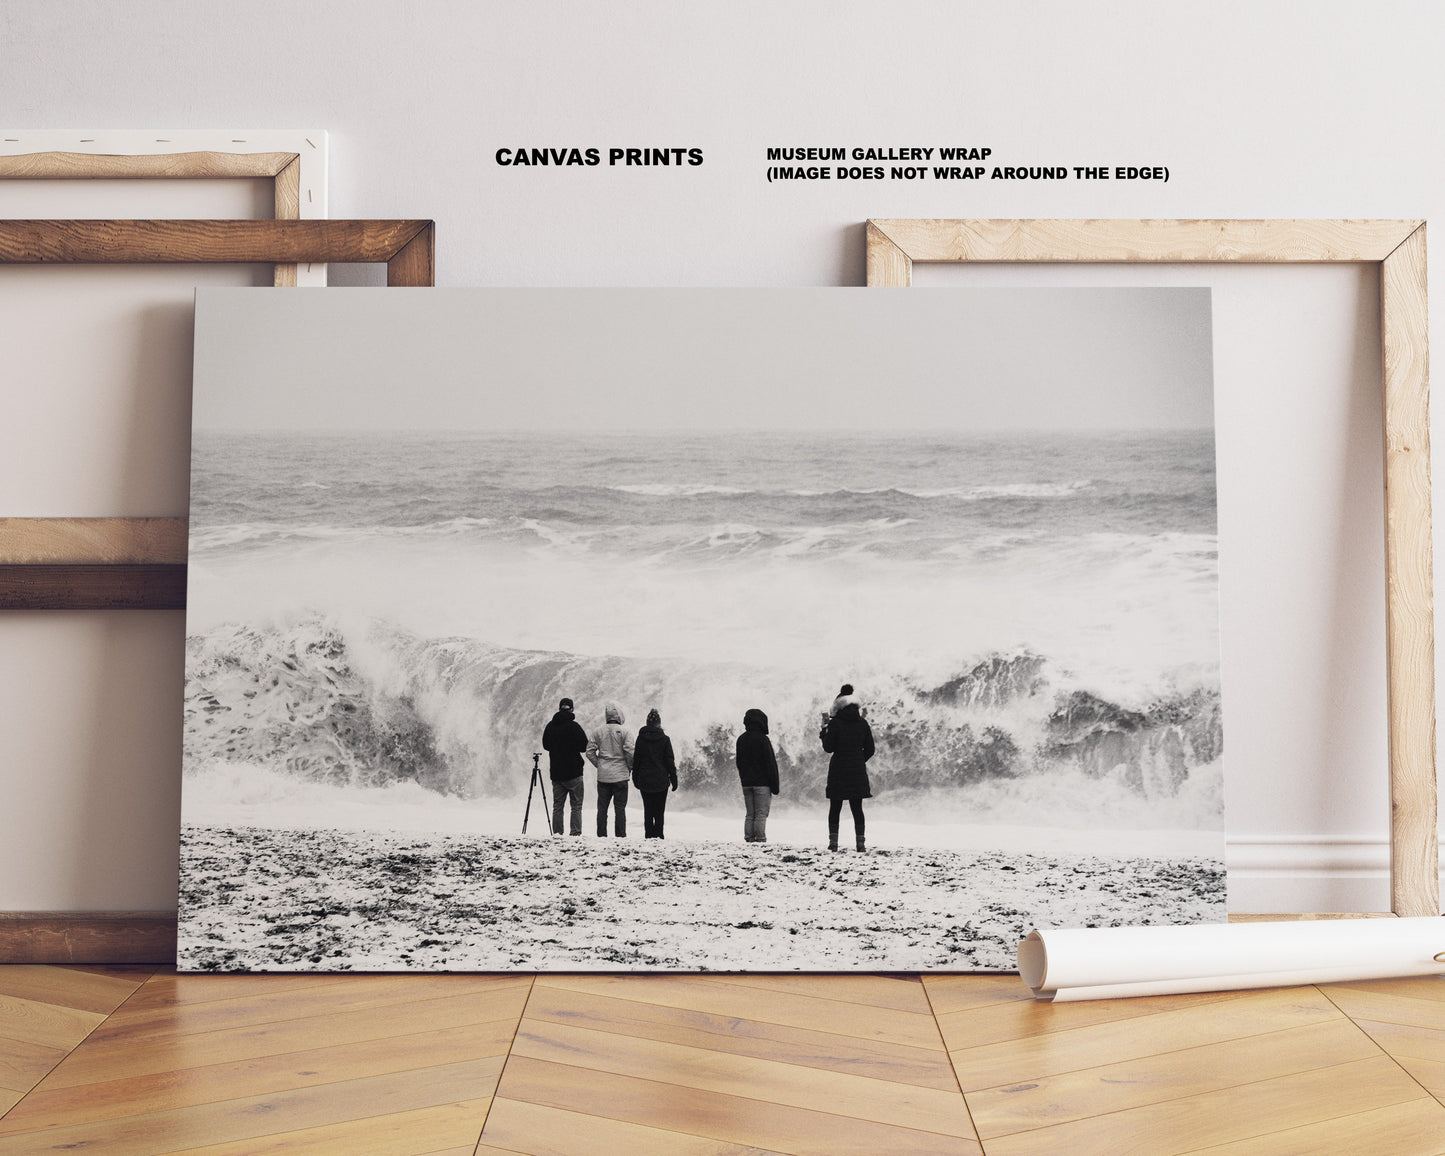 Stormy Seas - Iceland Photography Print - Iceland Wall Art - Iceland Poster - Black and White Photography - Landscape - People - Seascape